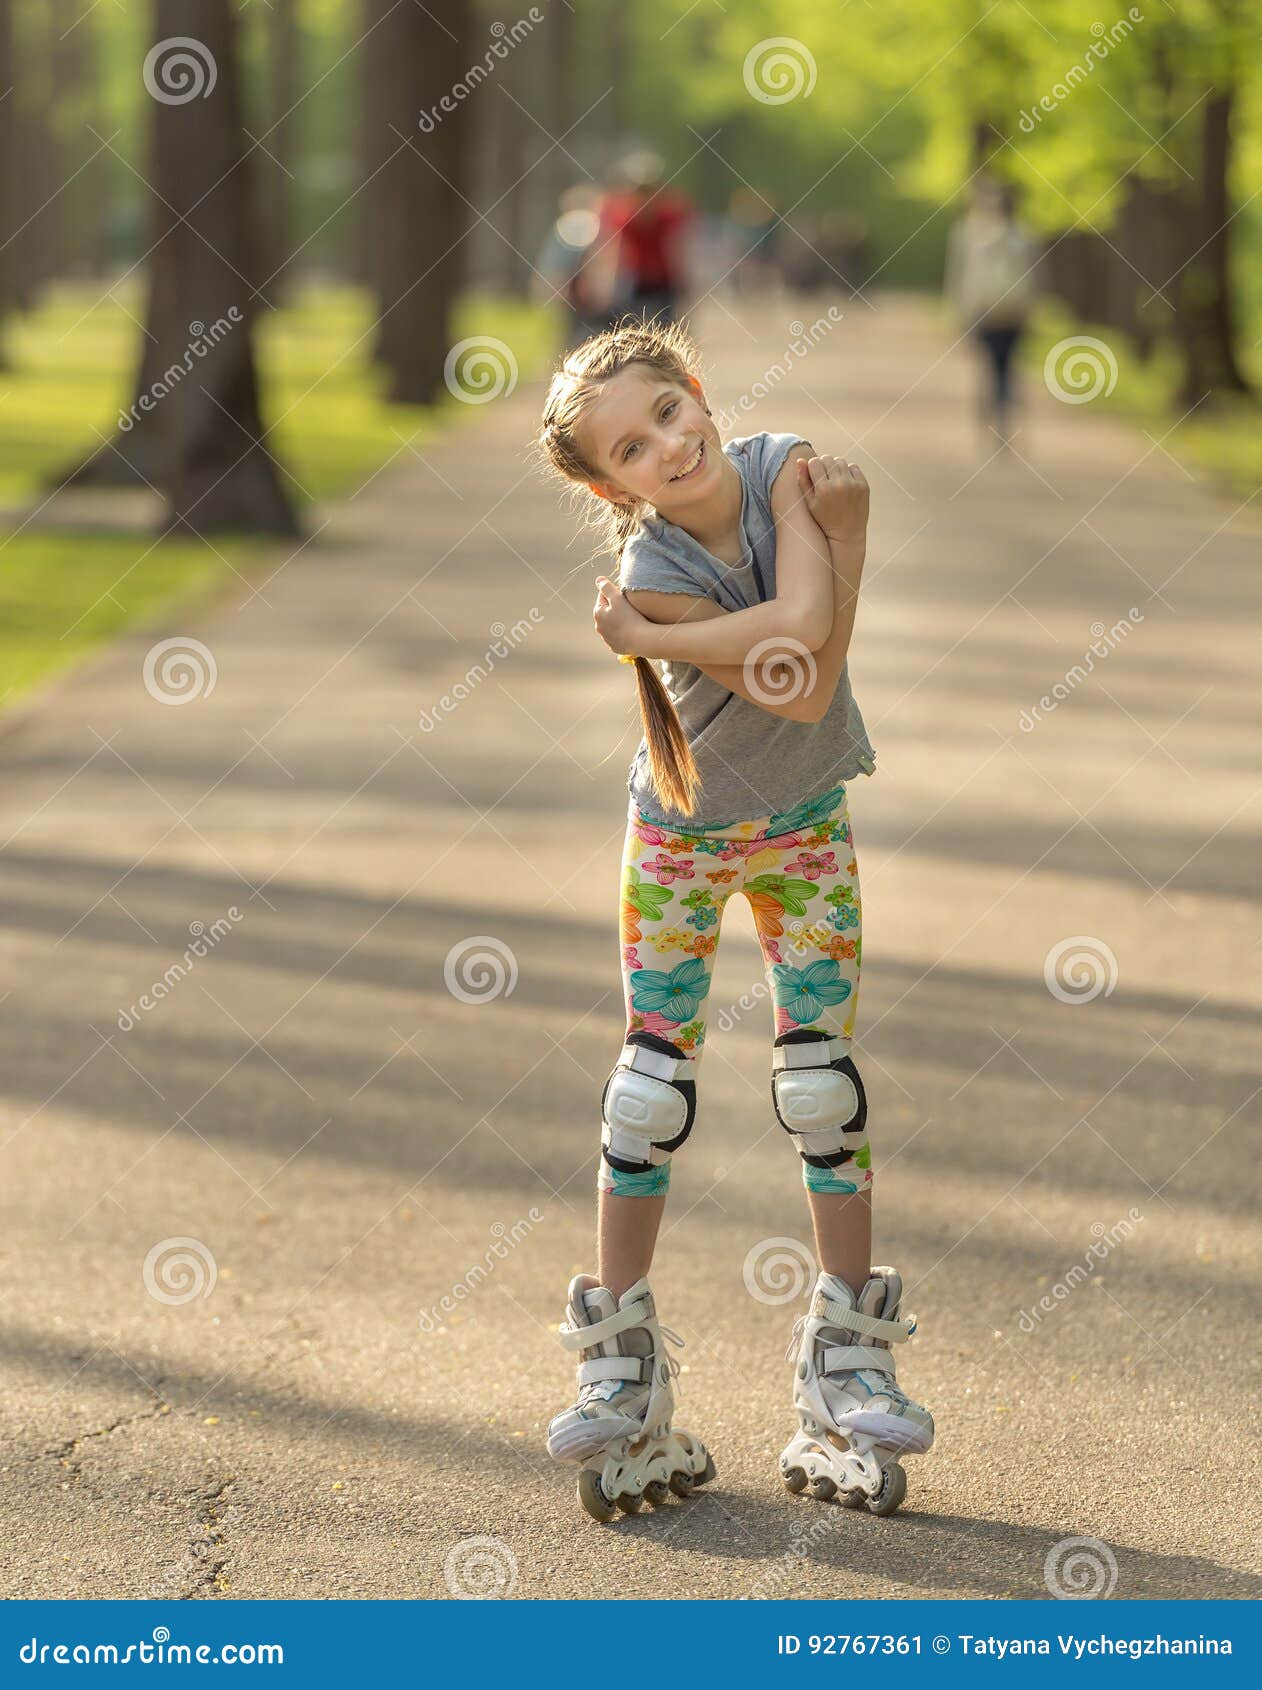 Teen Girl with Cute Hairstyle Skating Stock Image - Image of beautiful,  skateboarding: 92767361